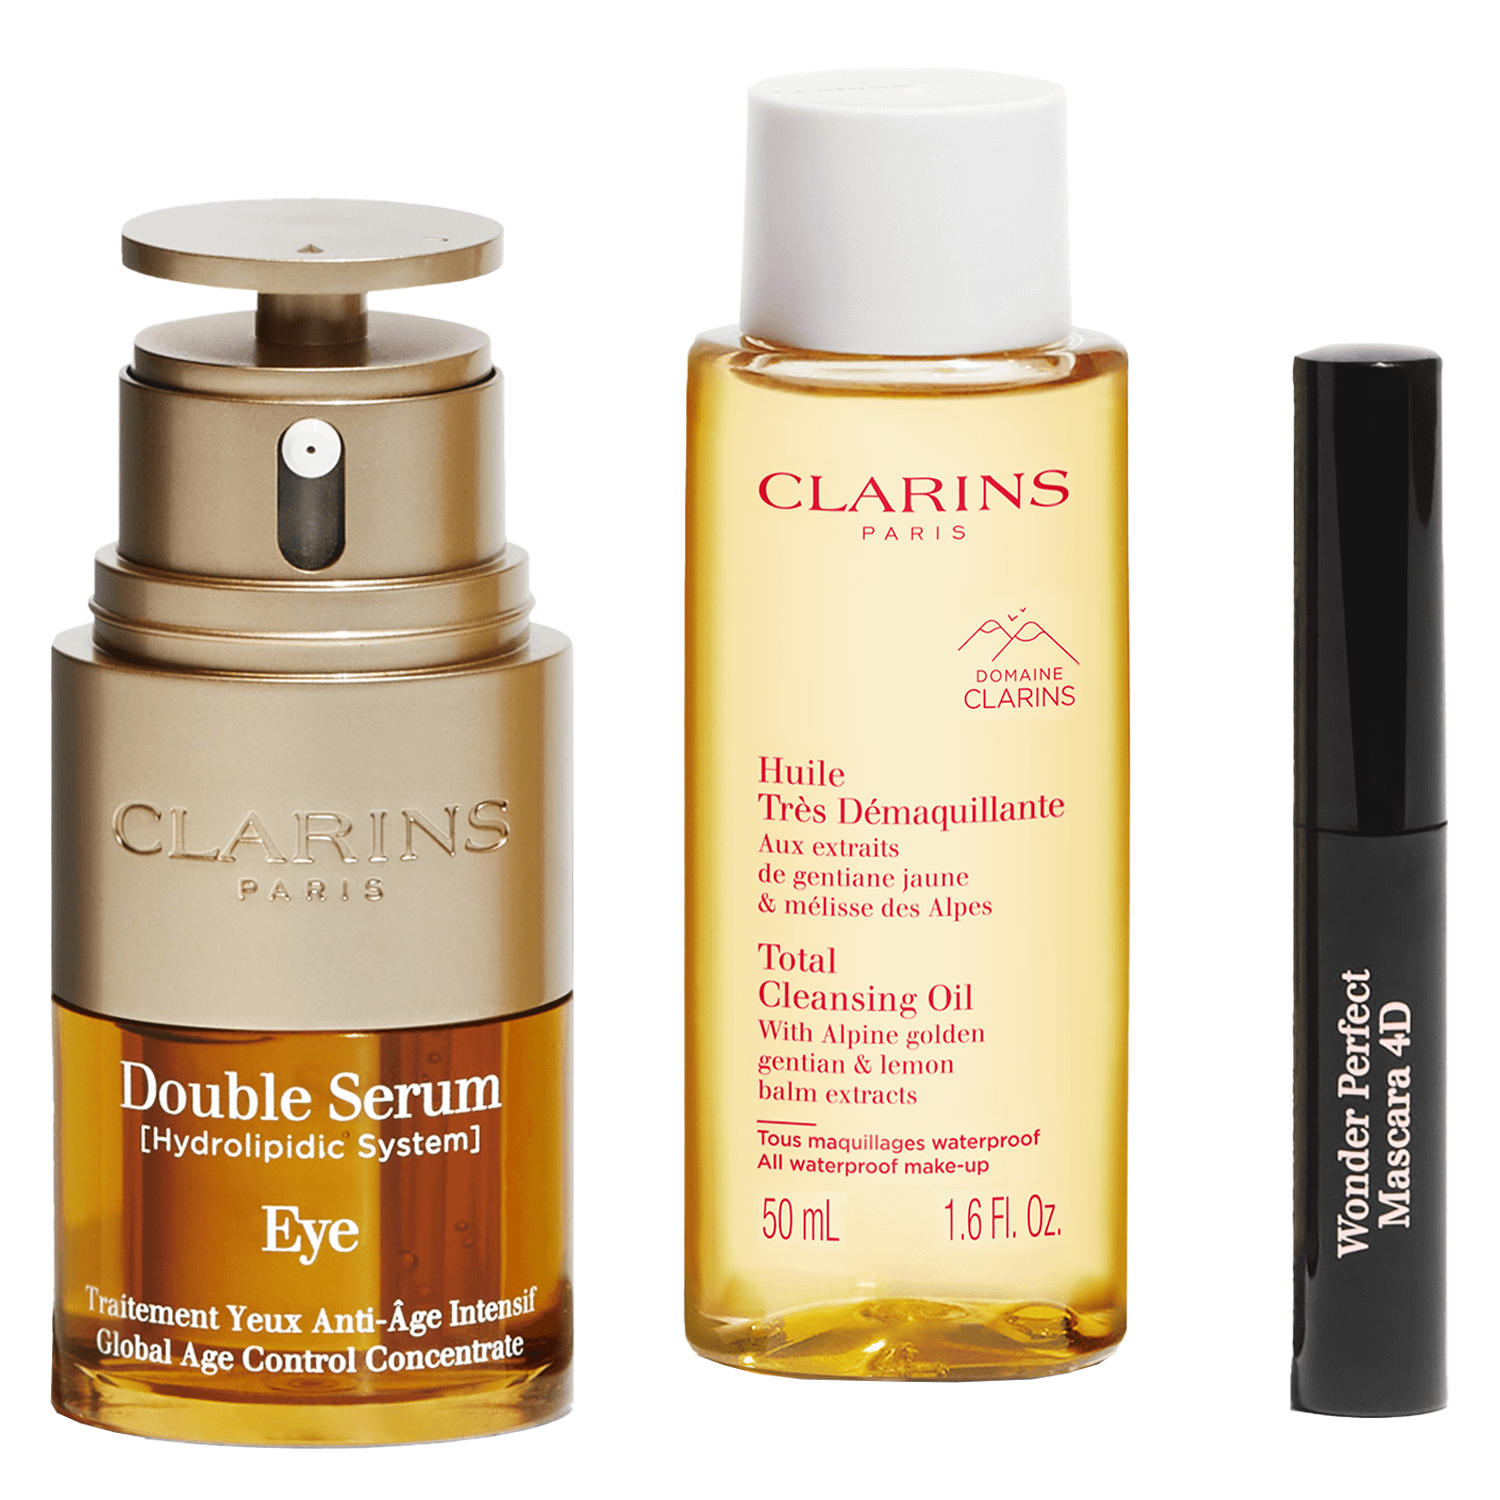 Product image from Clarins Specials - Double Serum Eye Skincare